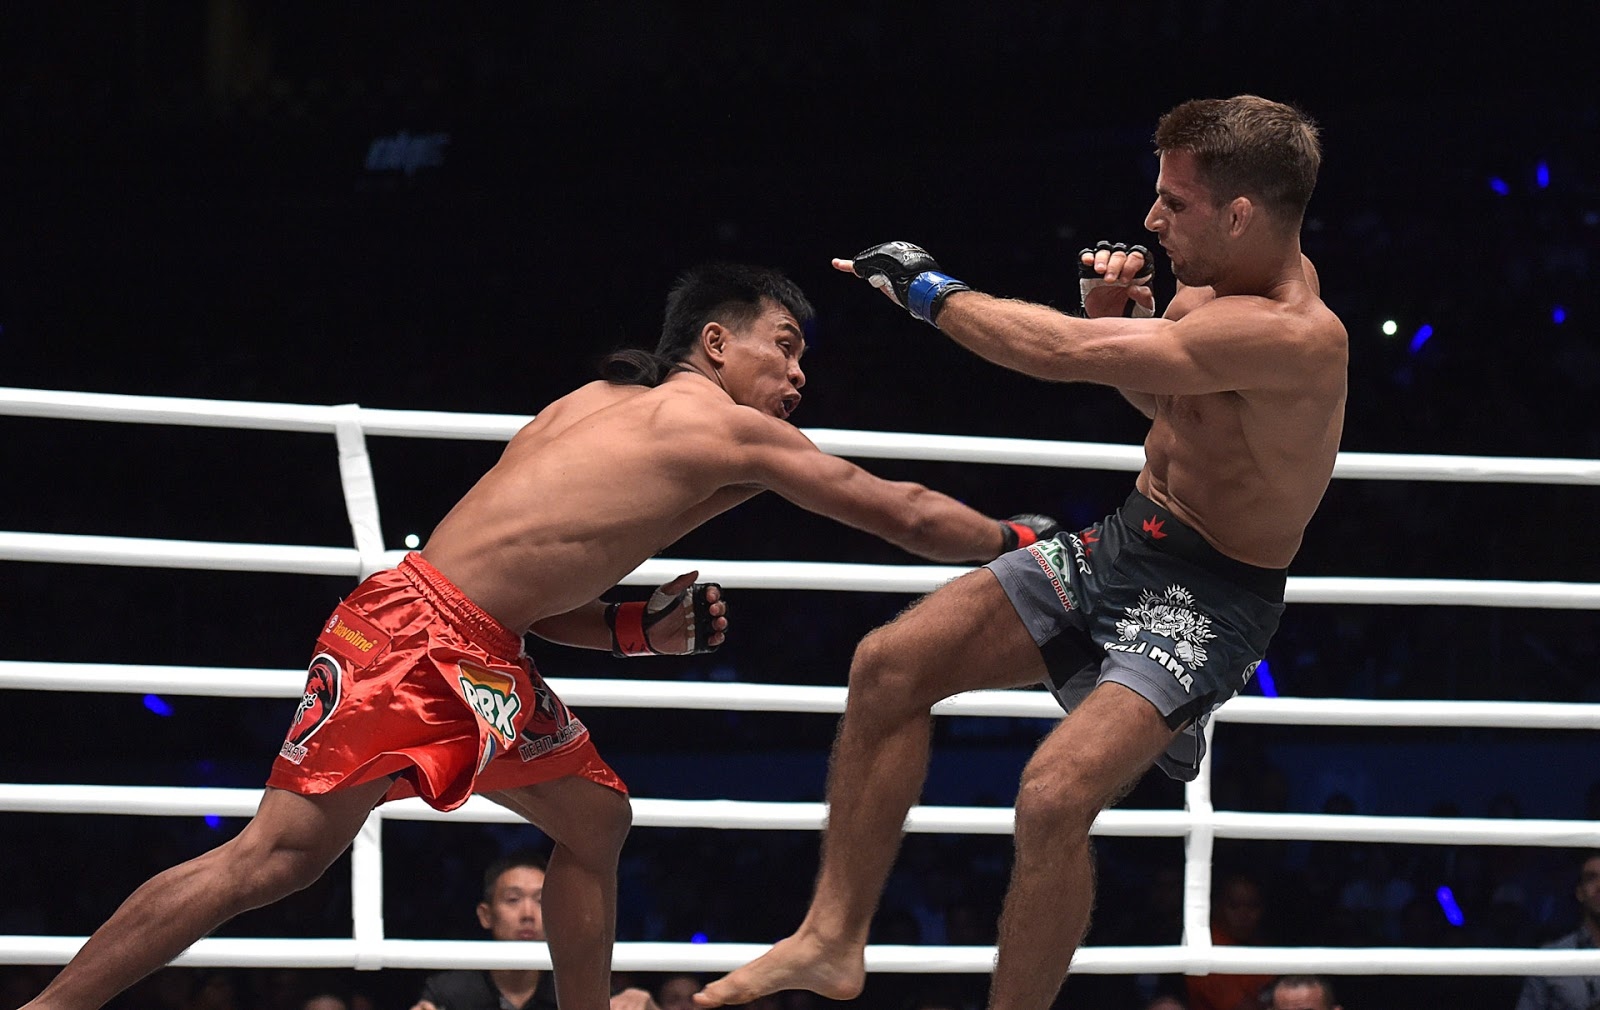 Kevin Belingon TKO's Andrew Leone in ONE Championship: Heroes of Honor main event